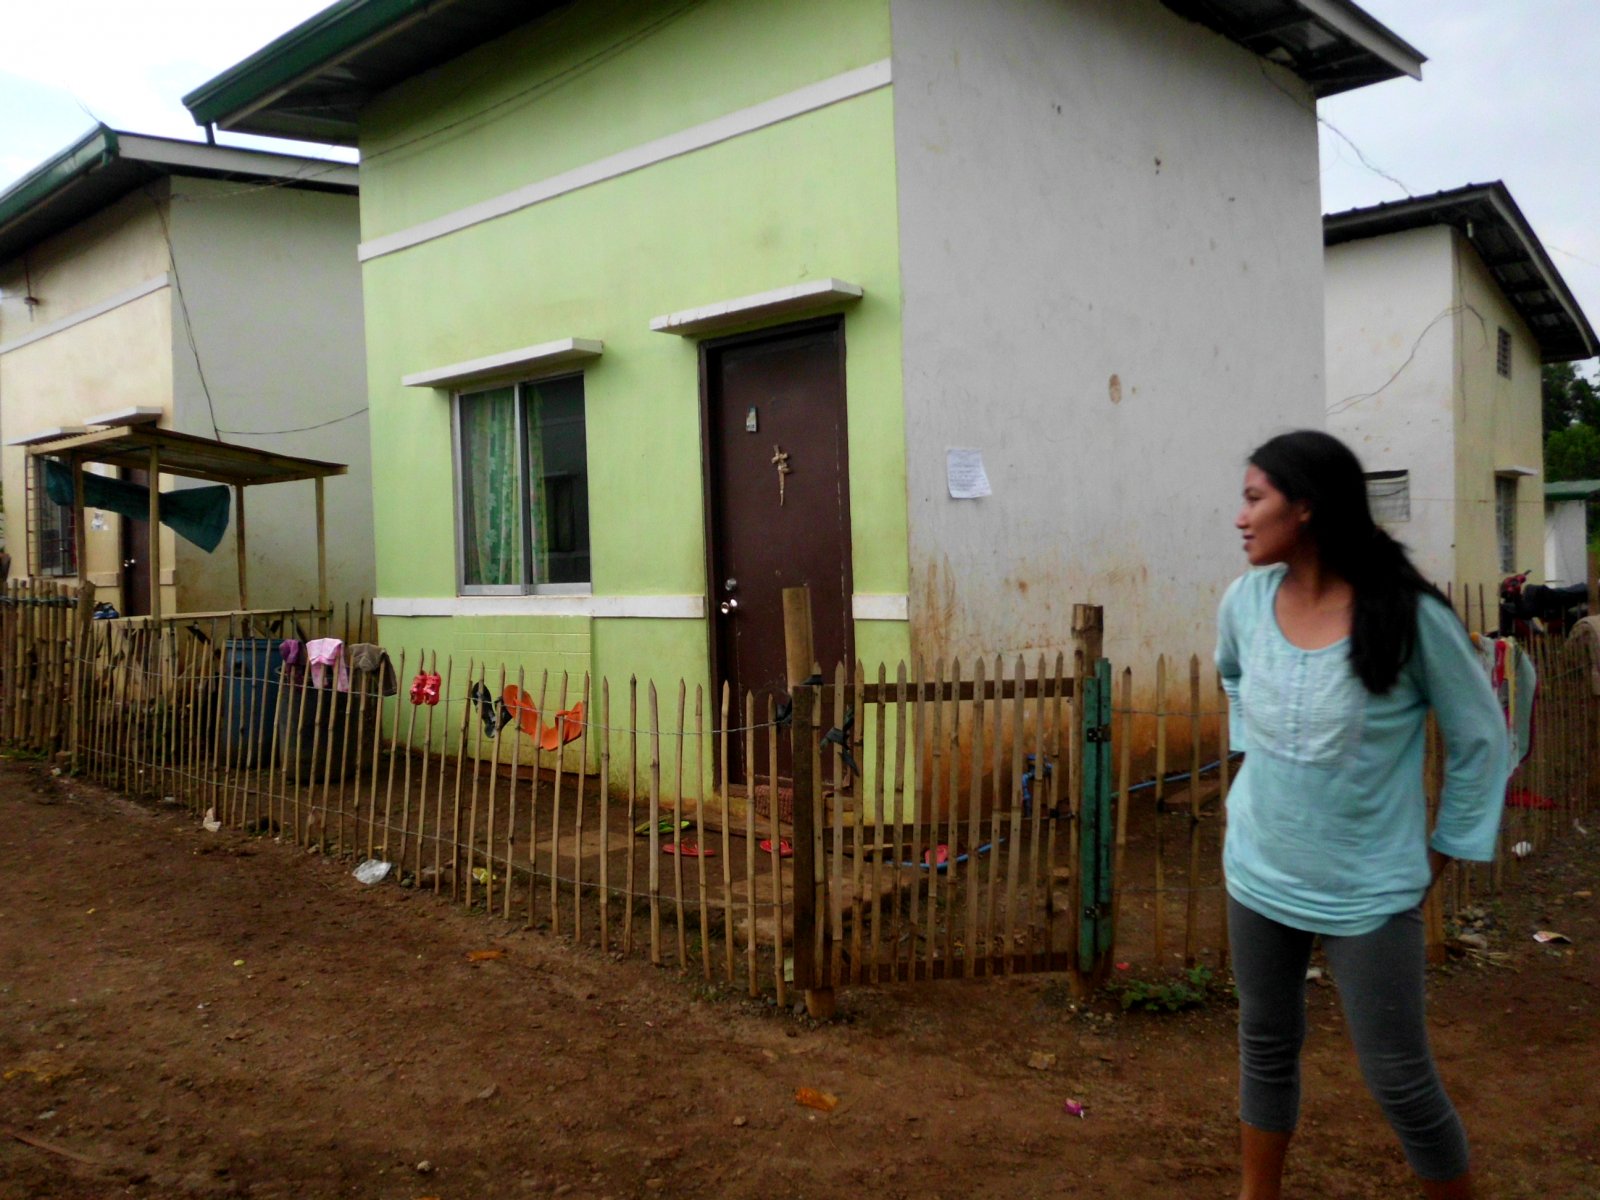 A houseowner stands by her own home at St. Augustine Village. Photo by libudsuroy. CreativeCommons